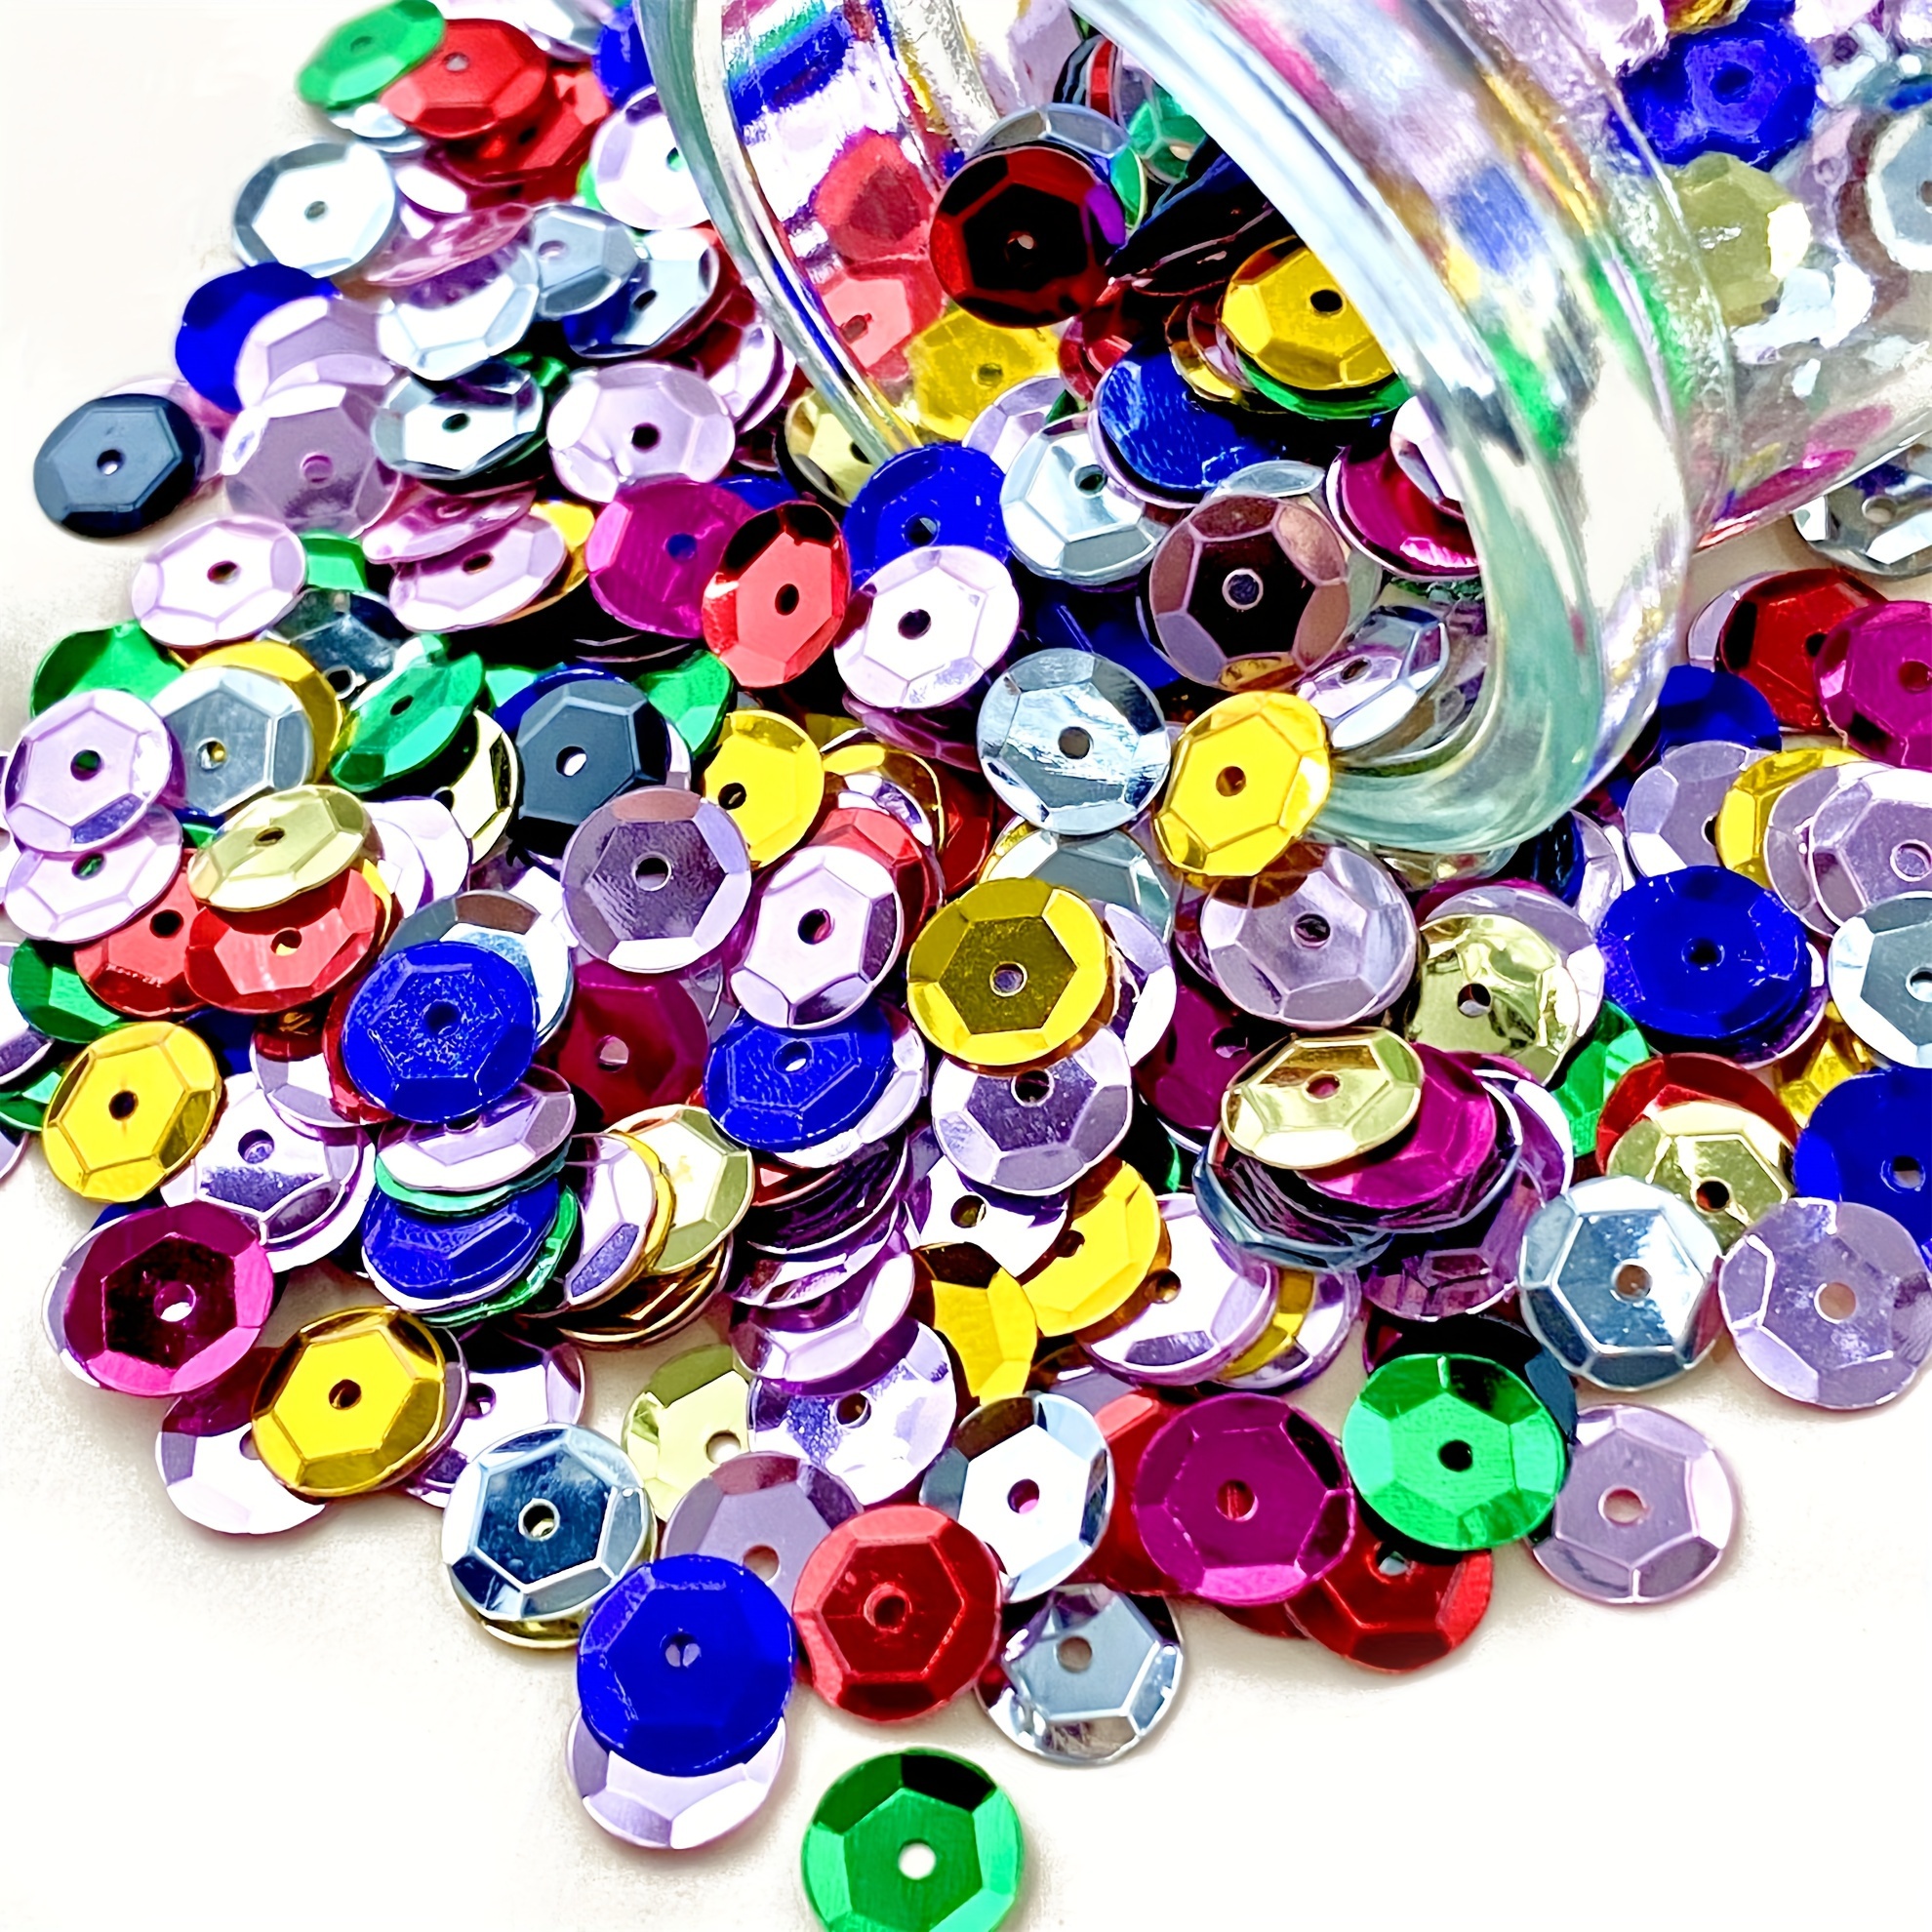 3000 Pieces Sequin Kit Paiettes Sequins Craft Loose Sequins Cup Iridescent  Spangles for DIY Crafts Making Sewing Sticking Threading Shiny Decorative